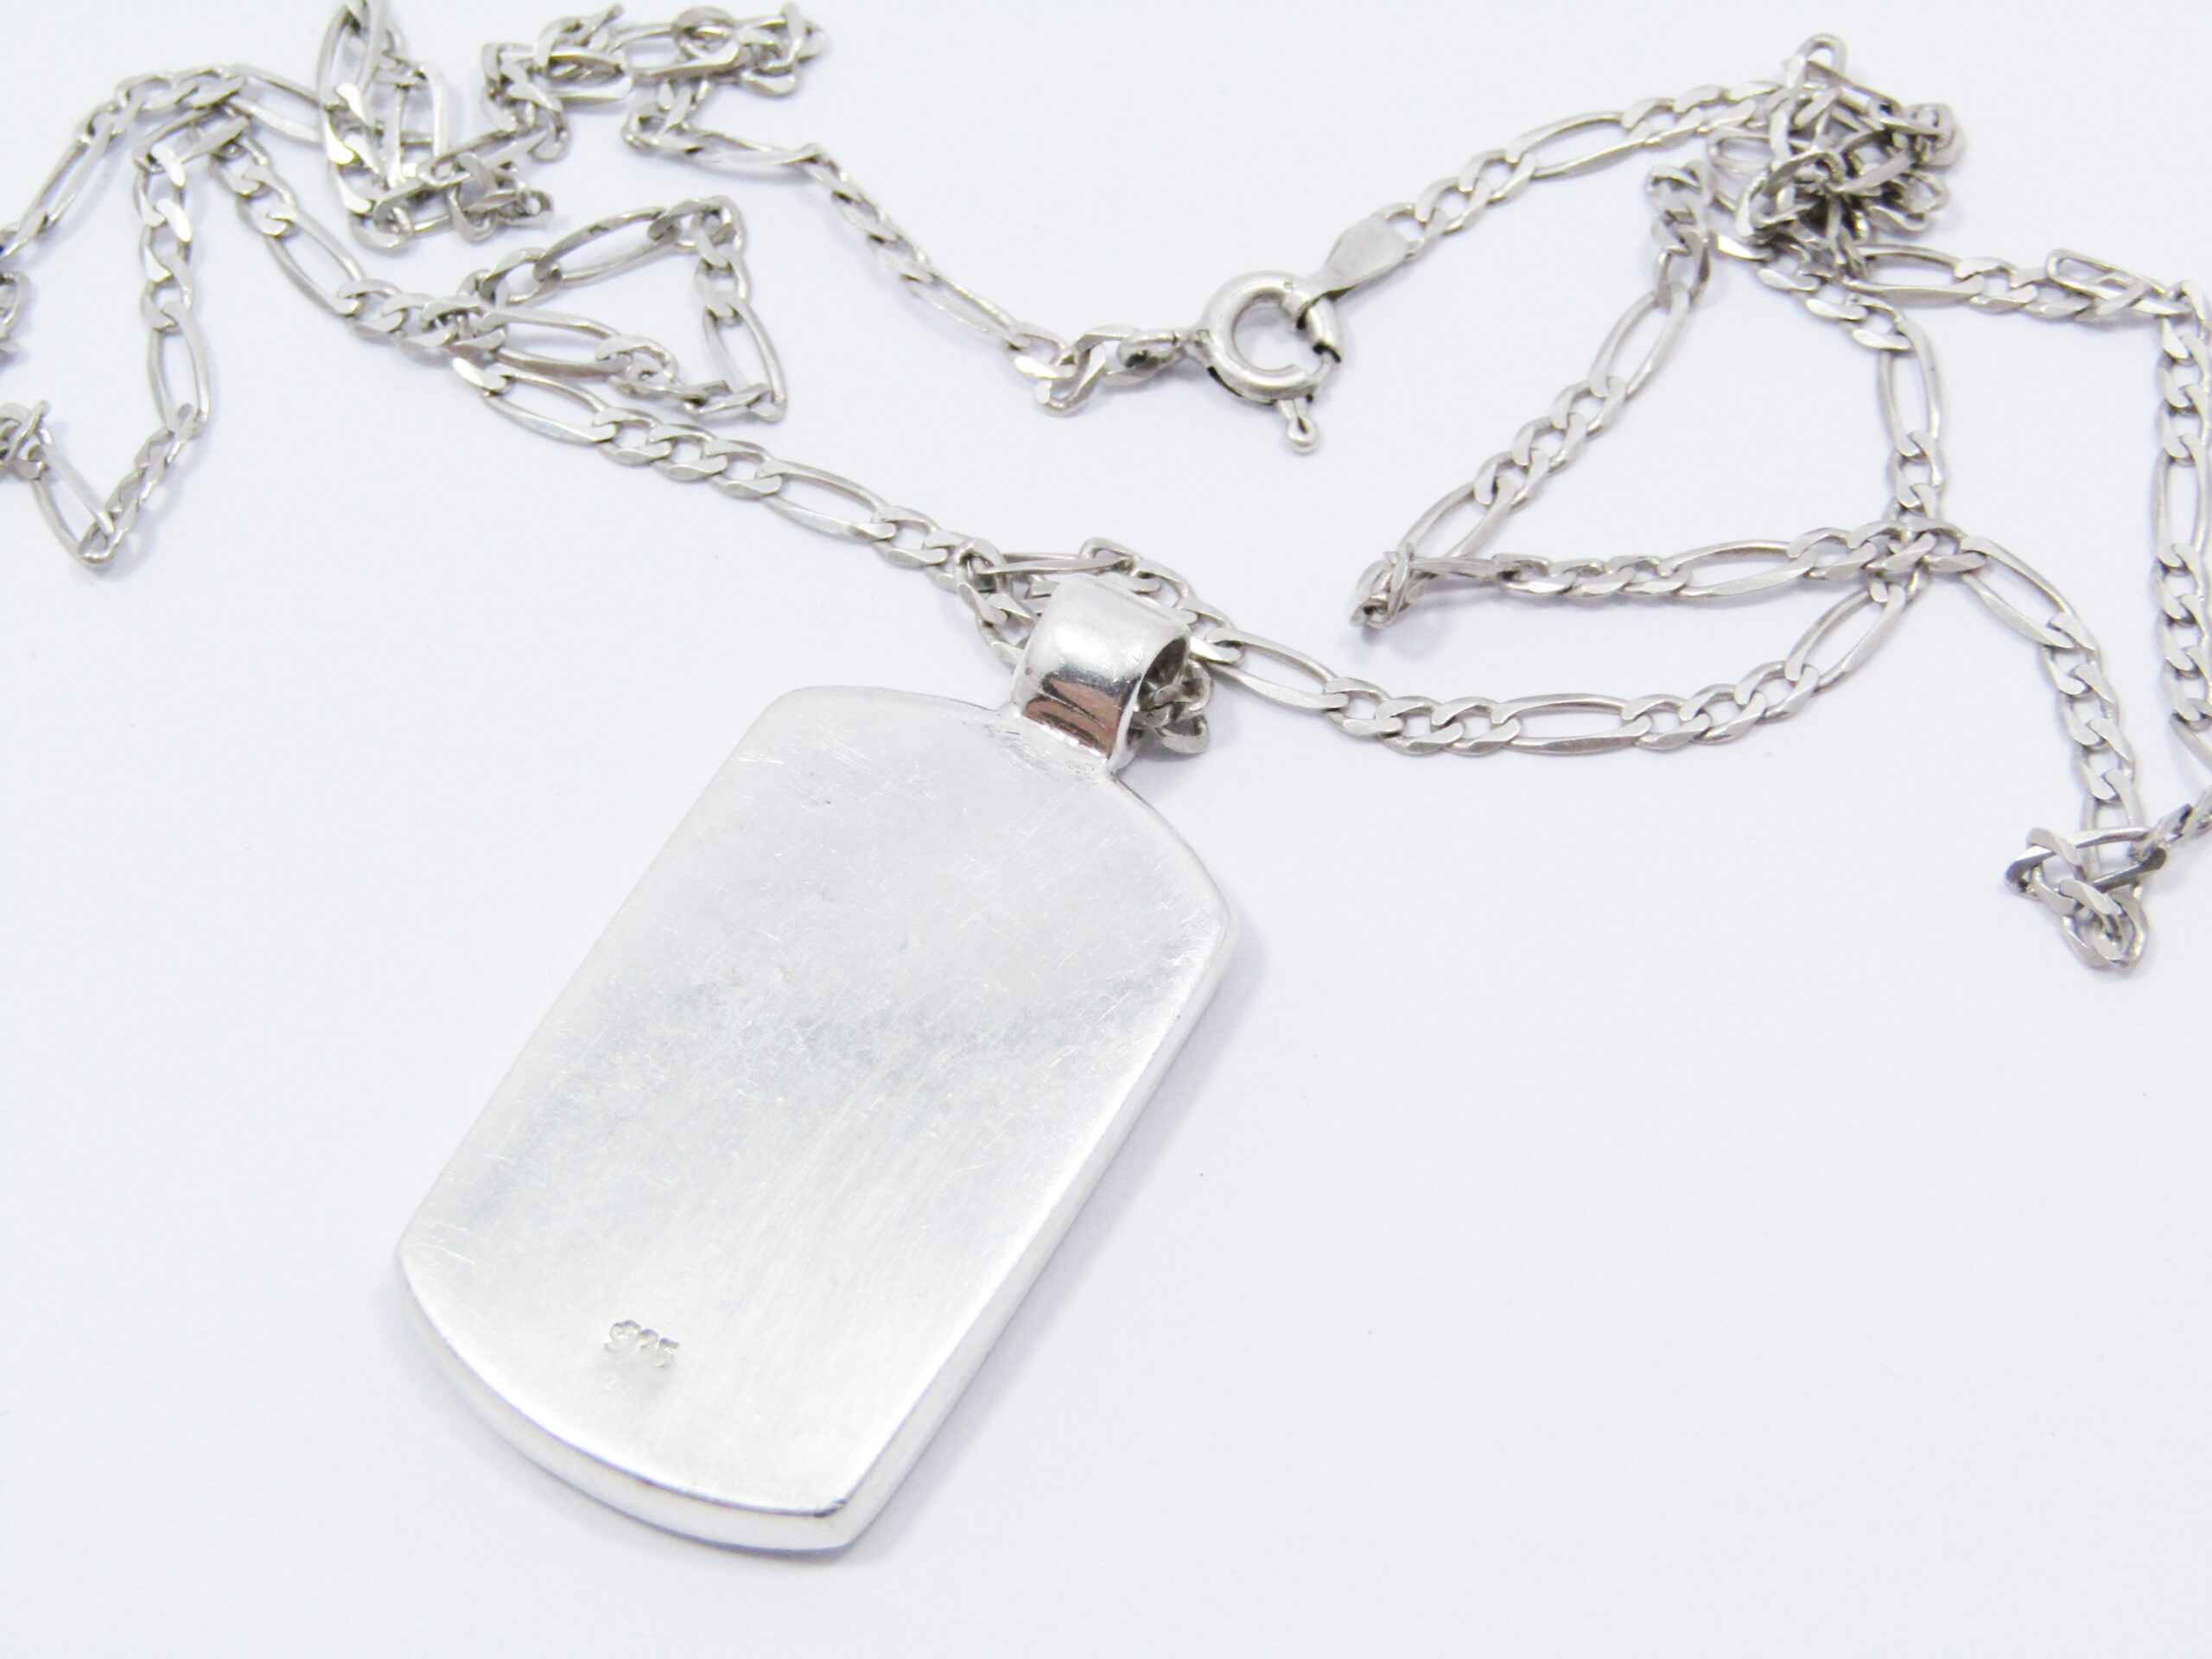 A Lovely Mother of Pearl and Black inlay Necklace on Chain in Sterling Silver